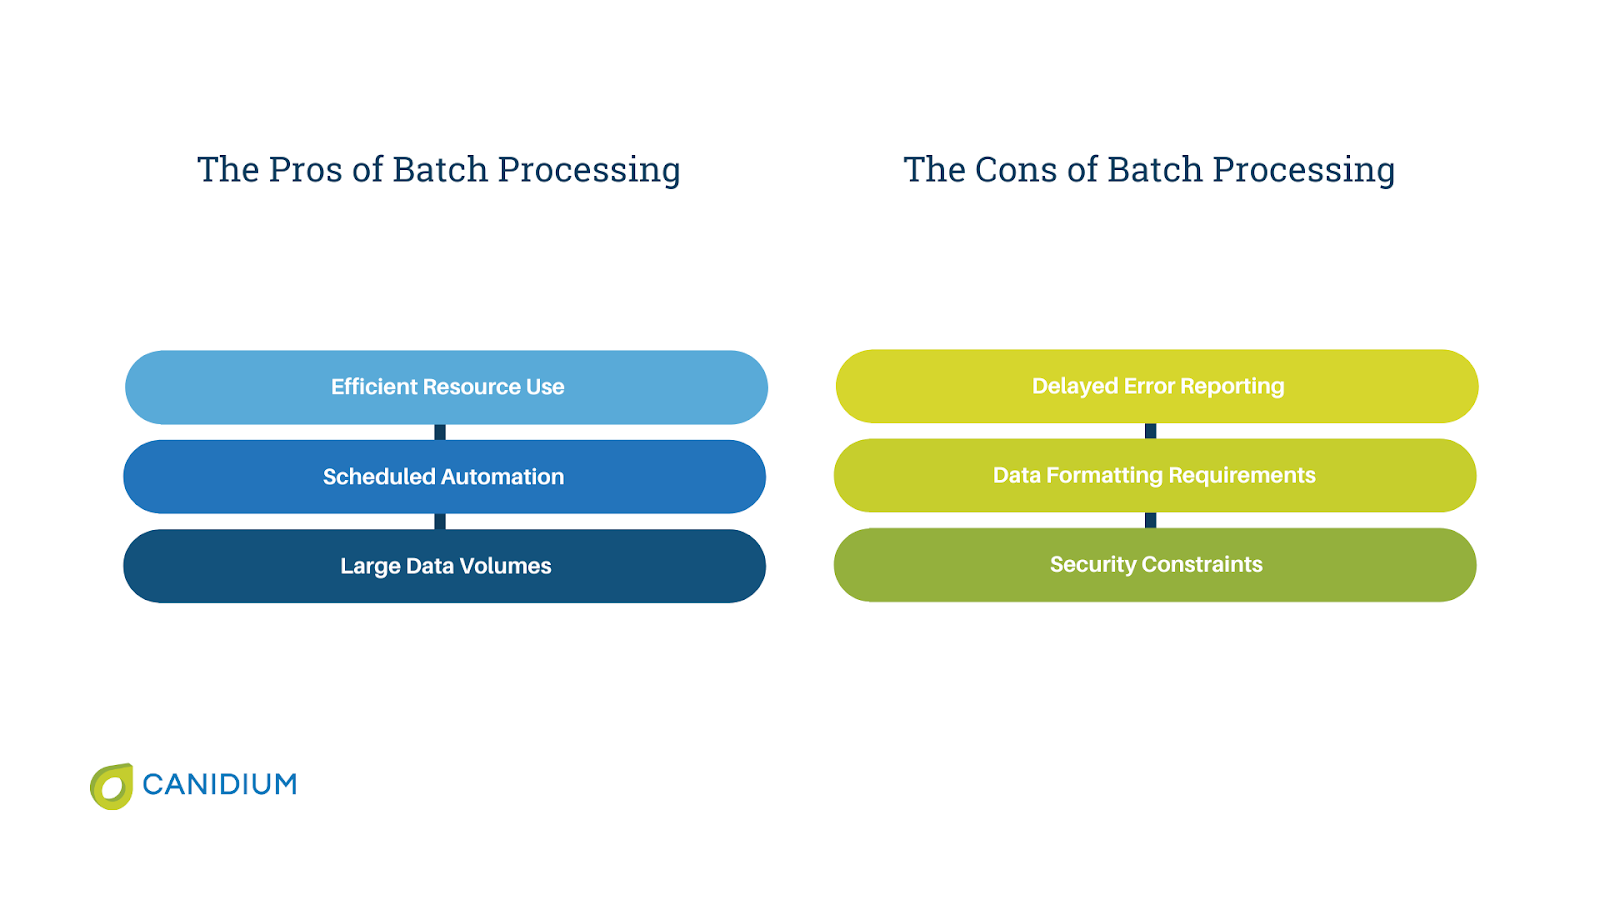 The pros and cons of batch processing